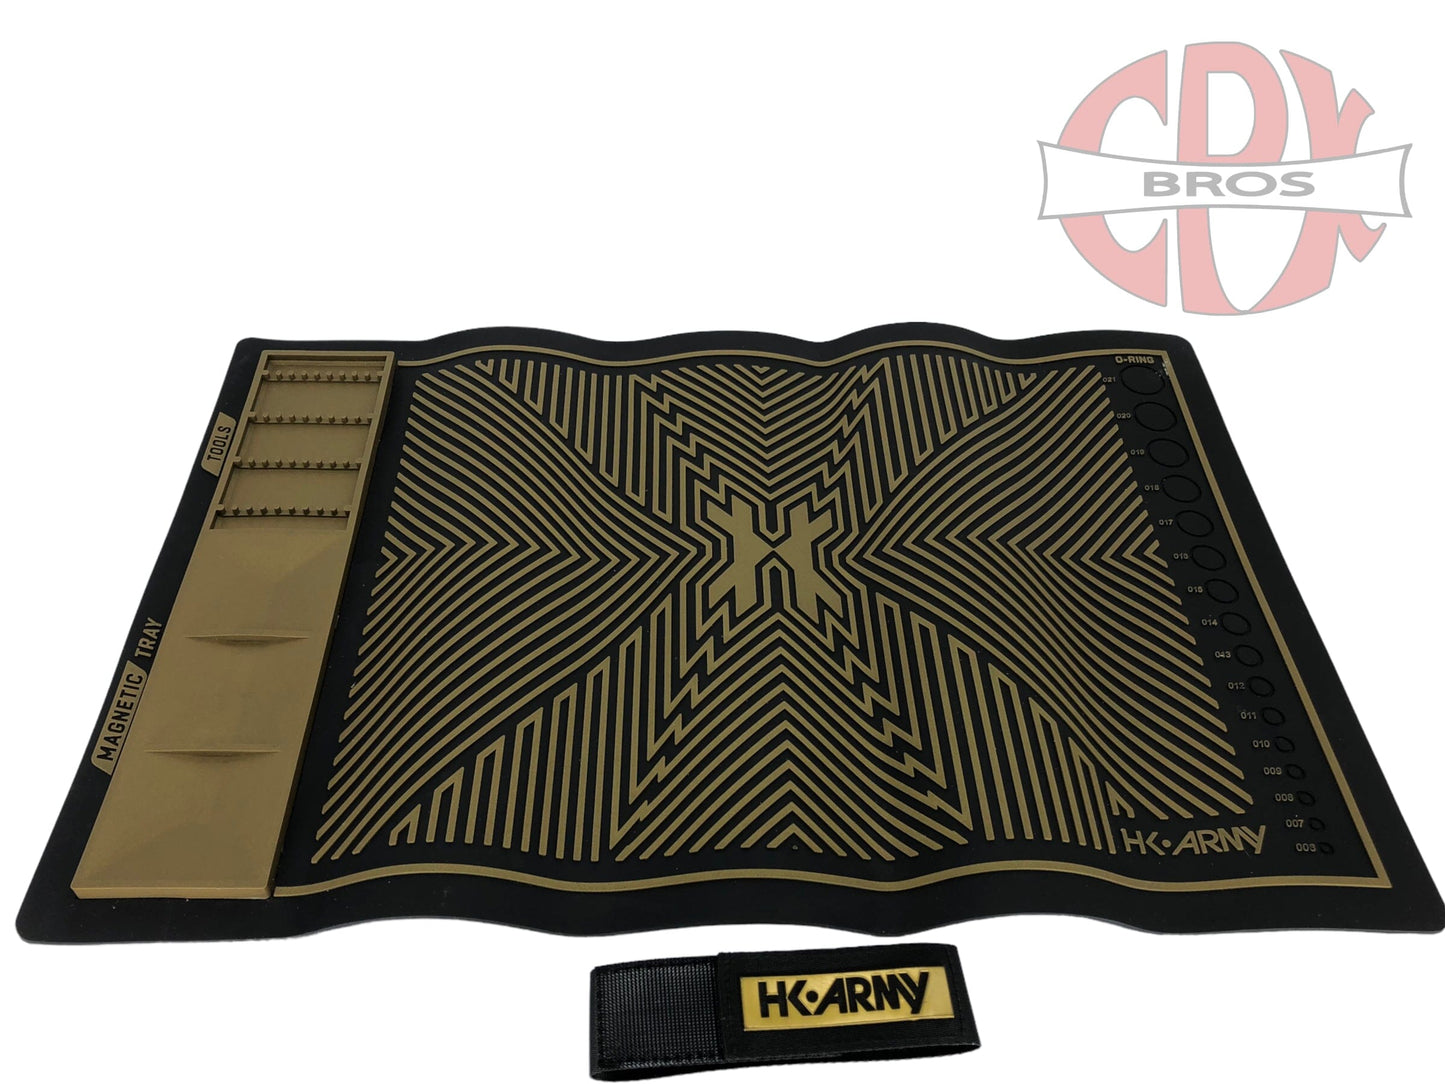 Used HK Army MagMat - Magnetic Tech Mat CPXBrosPaintball 